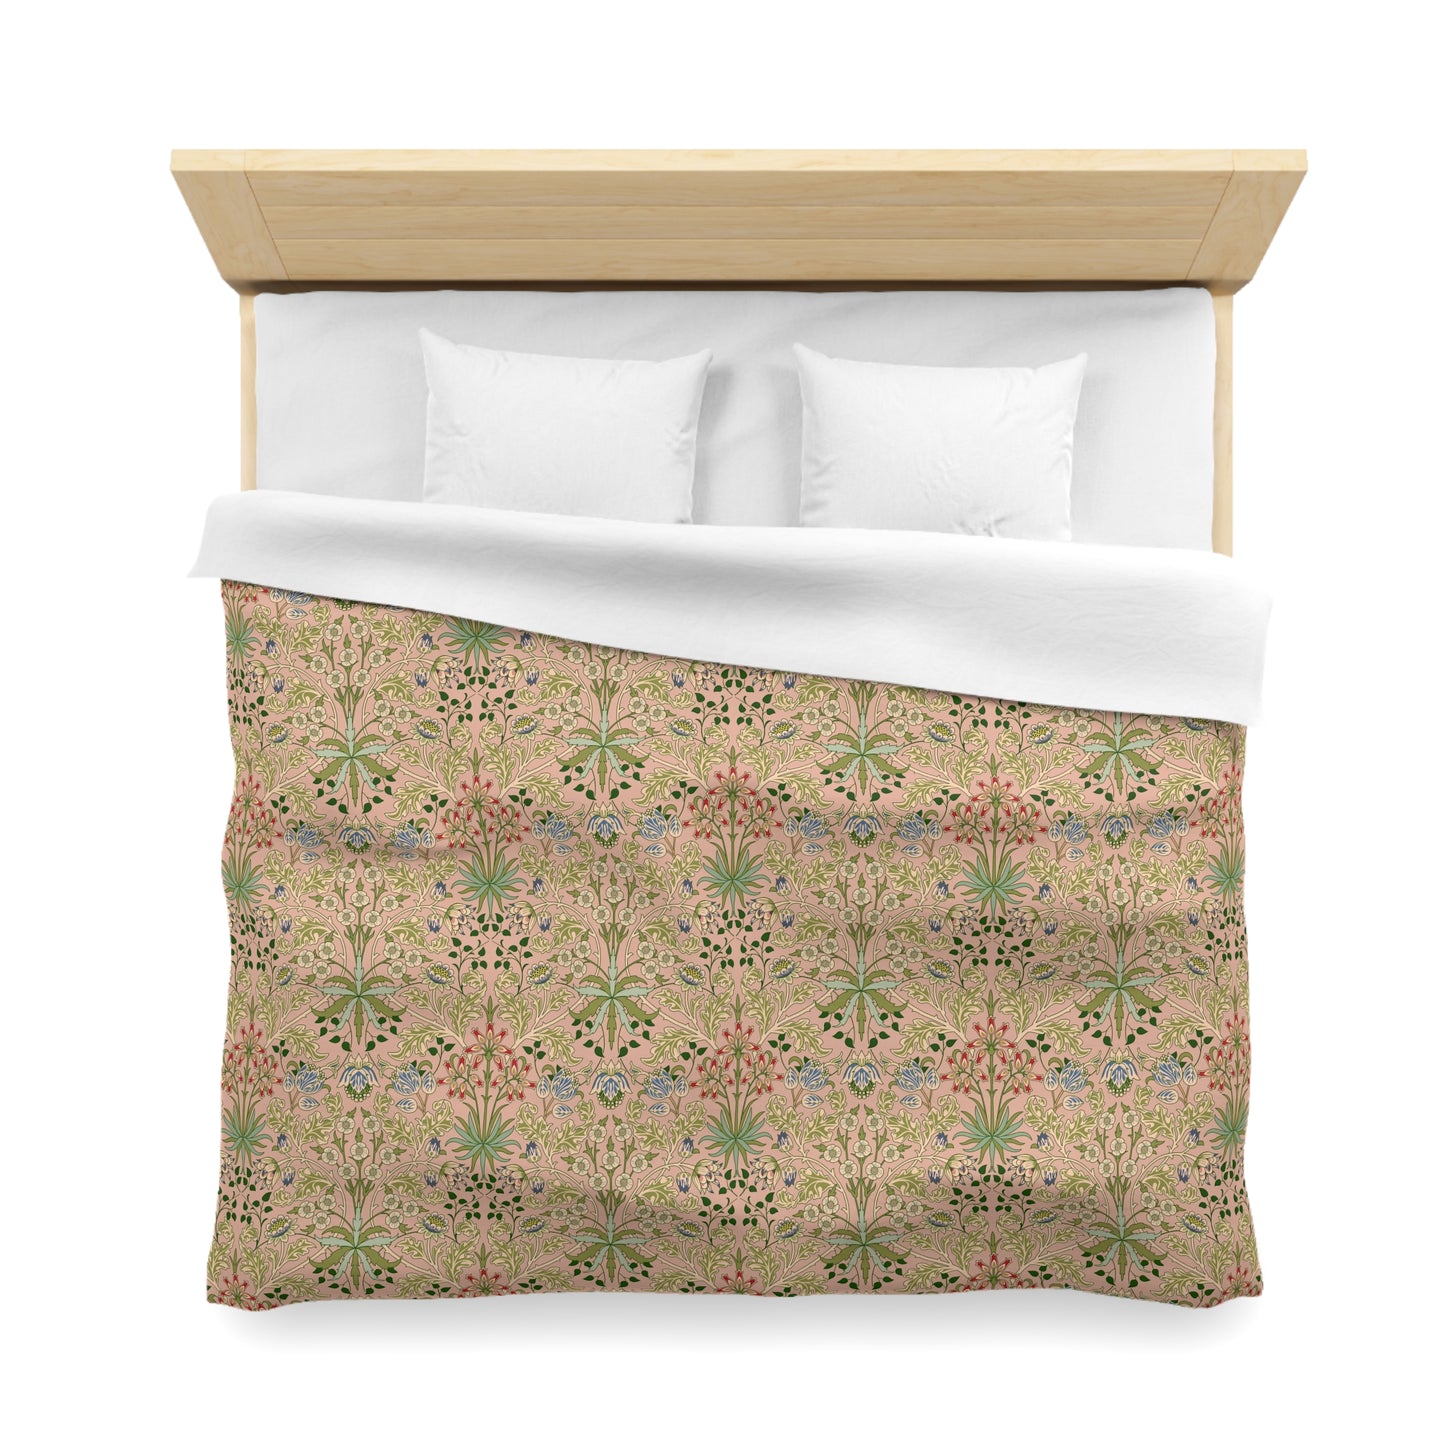 william-morris-co-duvet-cover-hyacinth-collection-blossom-9